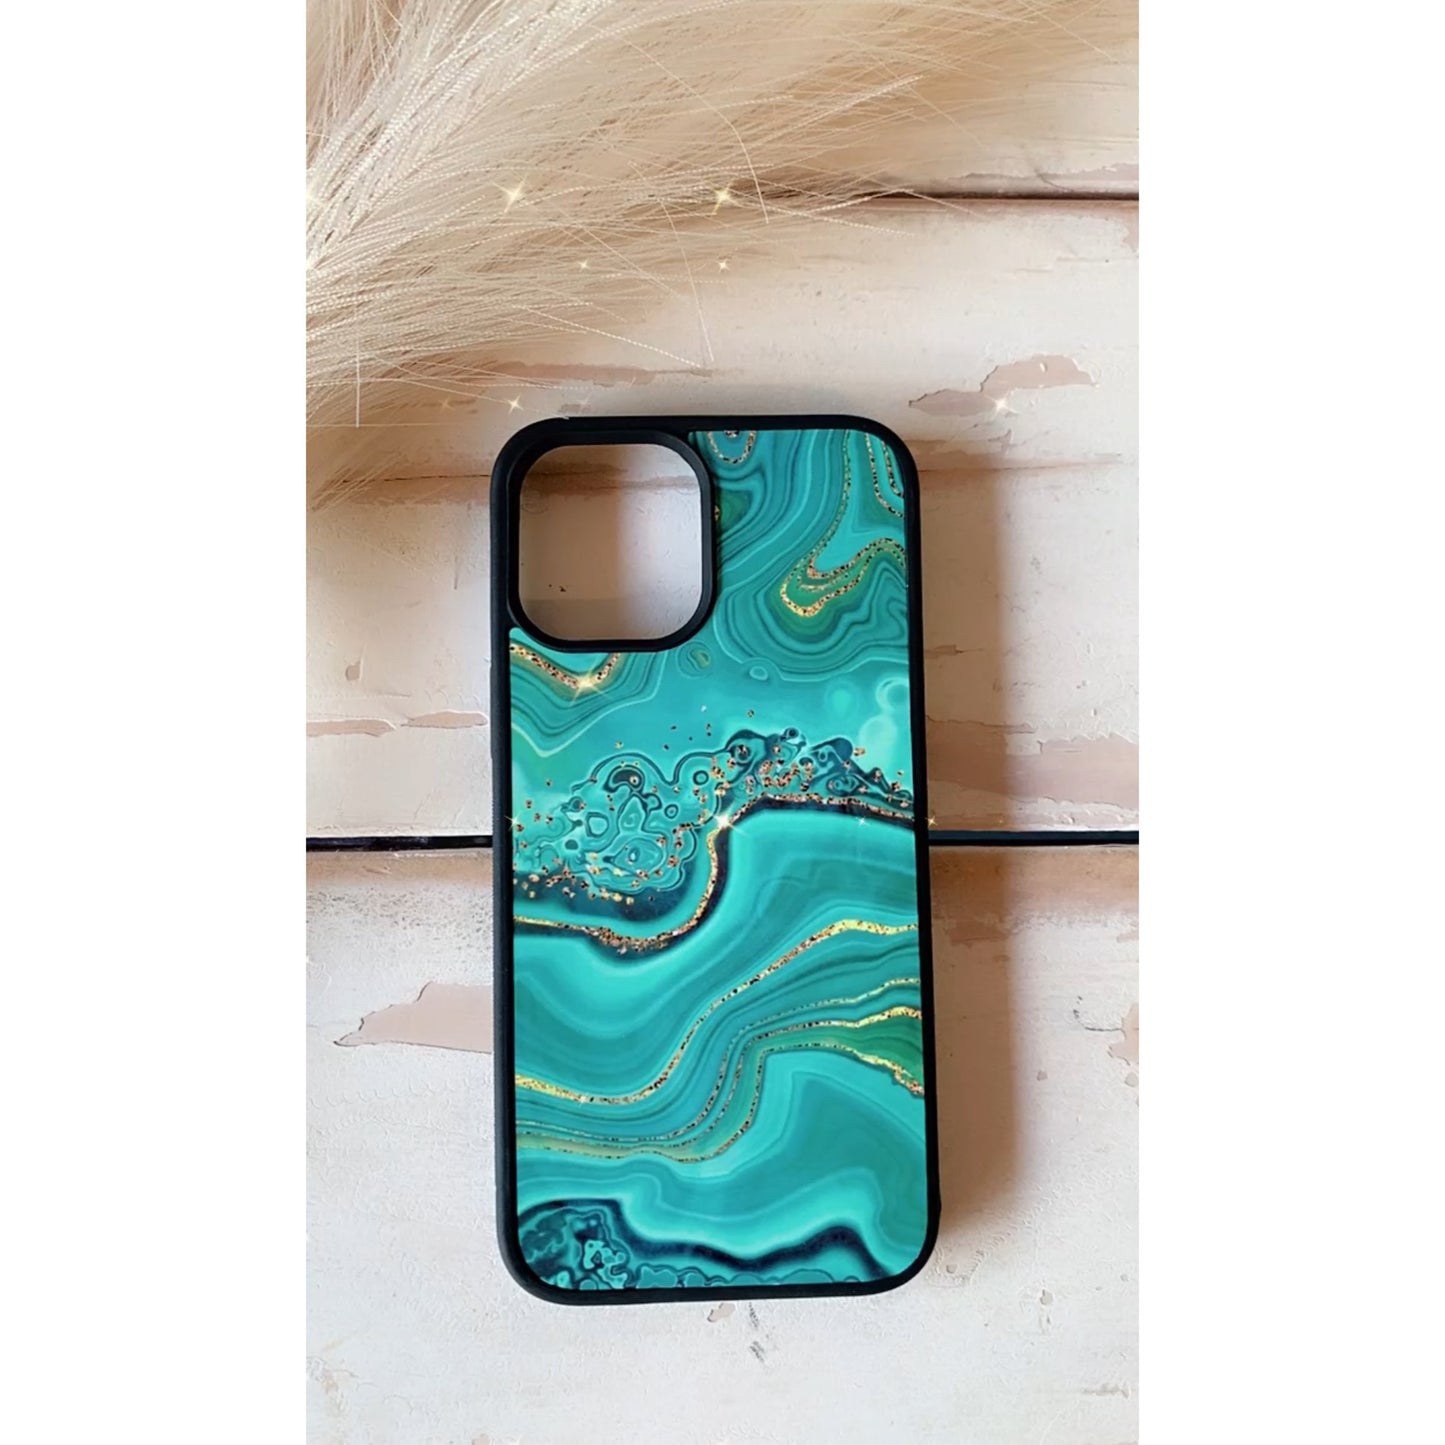 Teal marble phone case